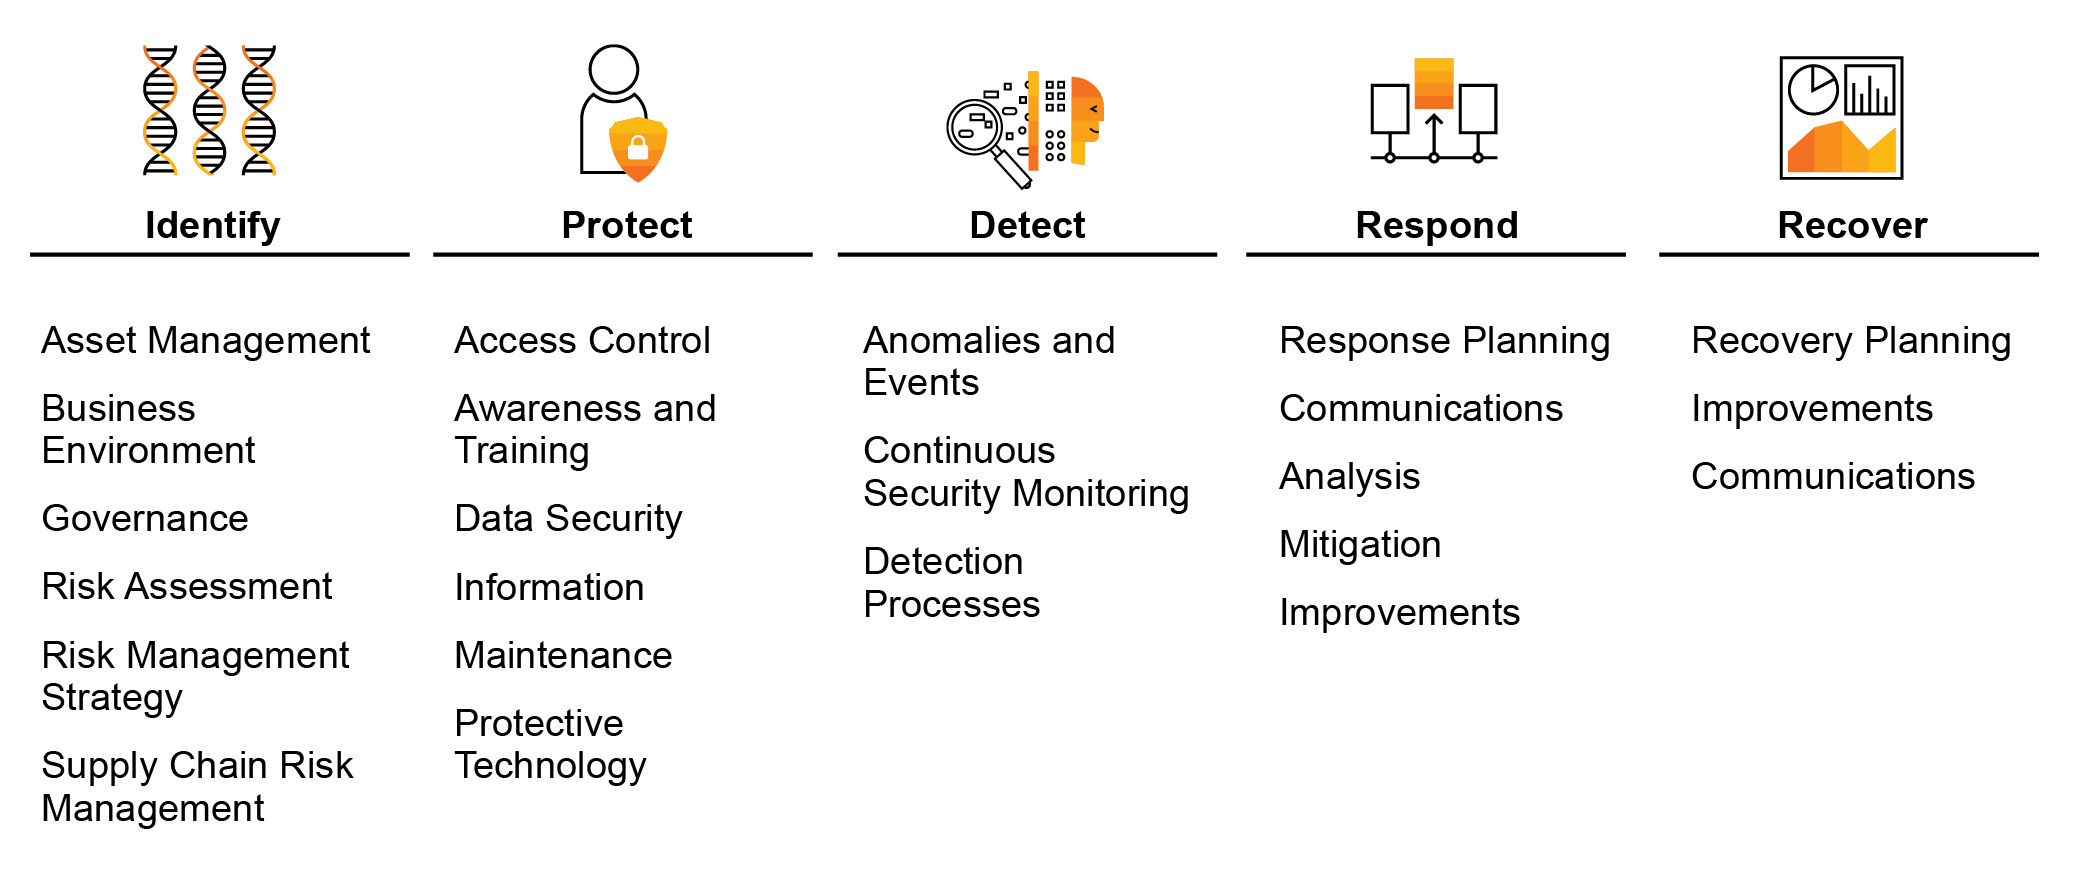 Figure 2 — The NIST Cybersecurity Framework helps organizations assess and improve their ability to prevent, detect, and respond to cyberattacks